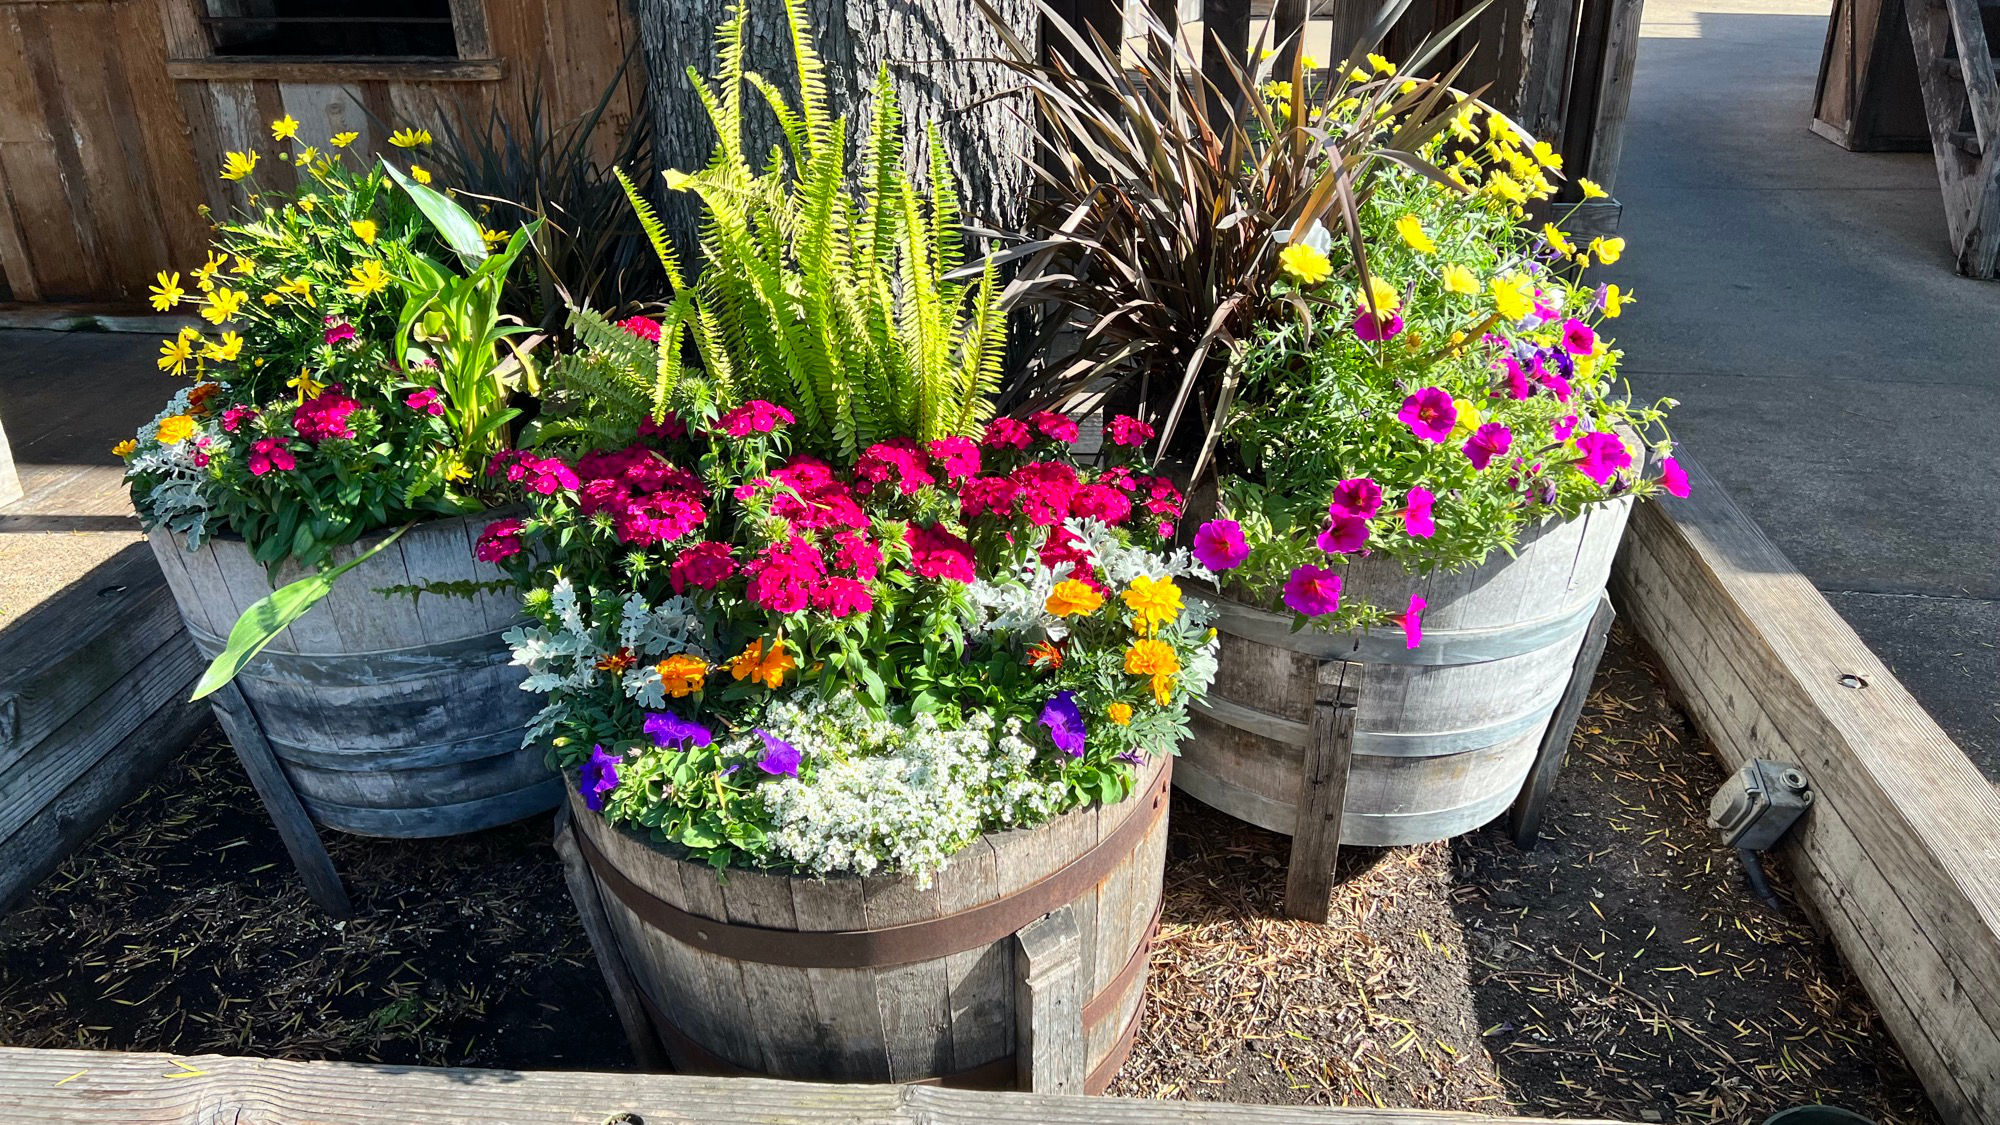 Flowers in front of the General Store